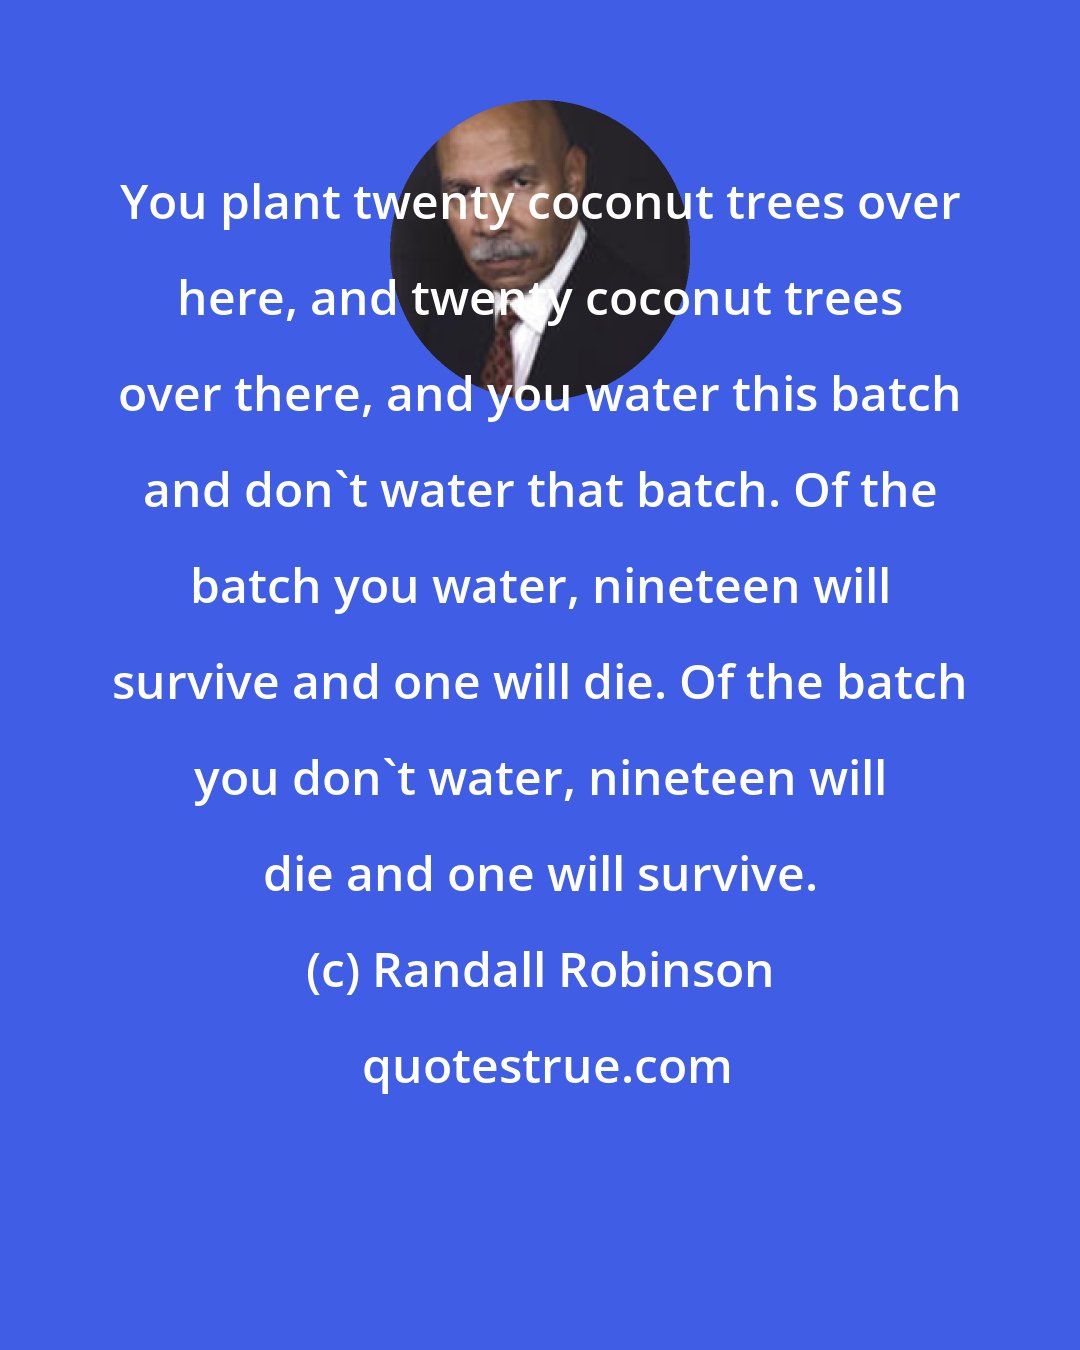 Randall Robinson: You plant twenty coconut trees over here, and twenty coconut trees over there, and you water this batch and don't water that batch. Of the batch you water, nineteen will survive and one will die. Of the batch you don't water, nineteen will die and one will survive.